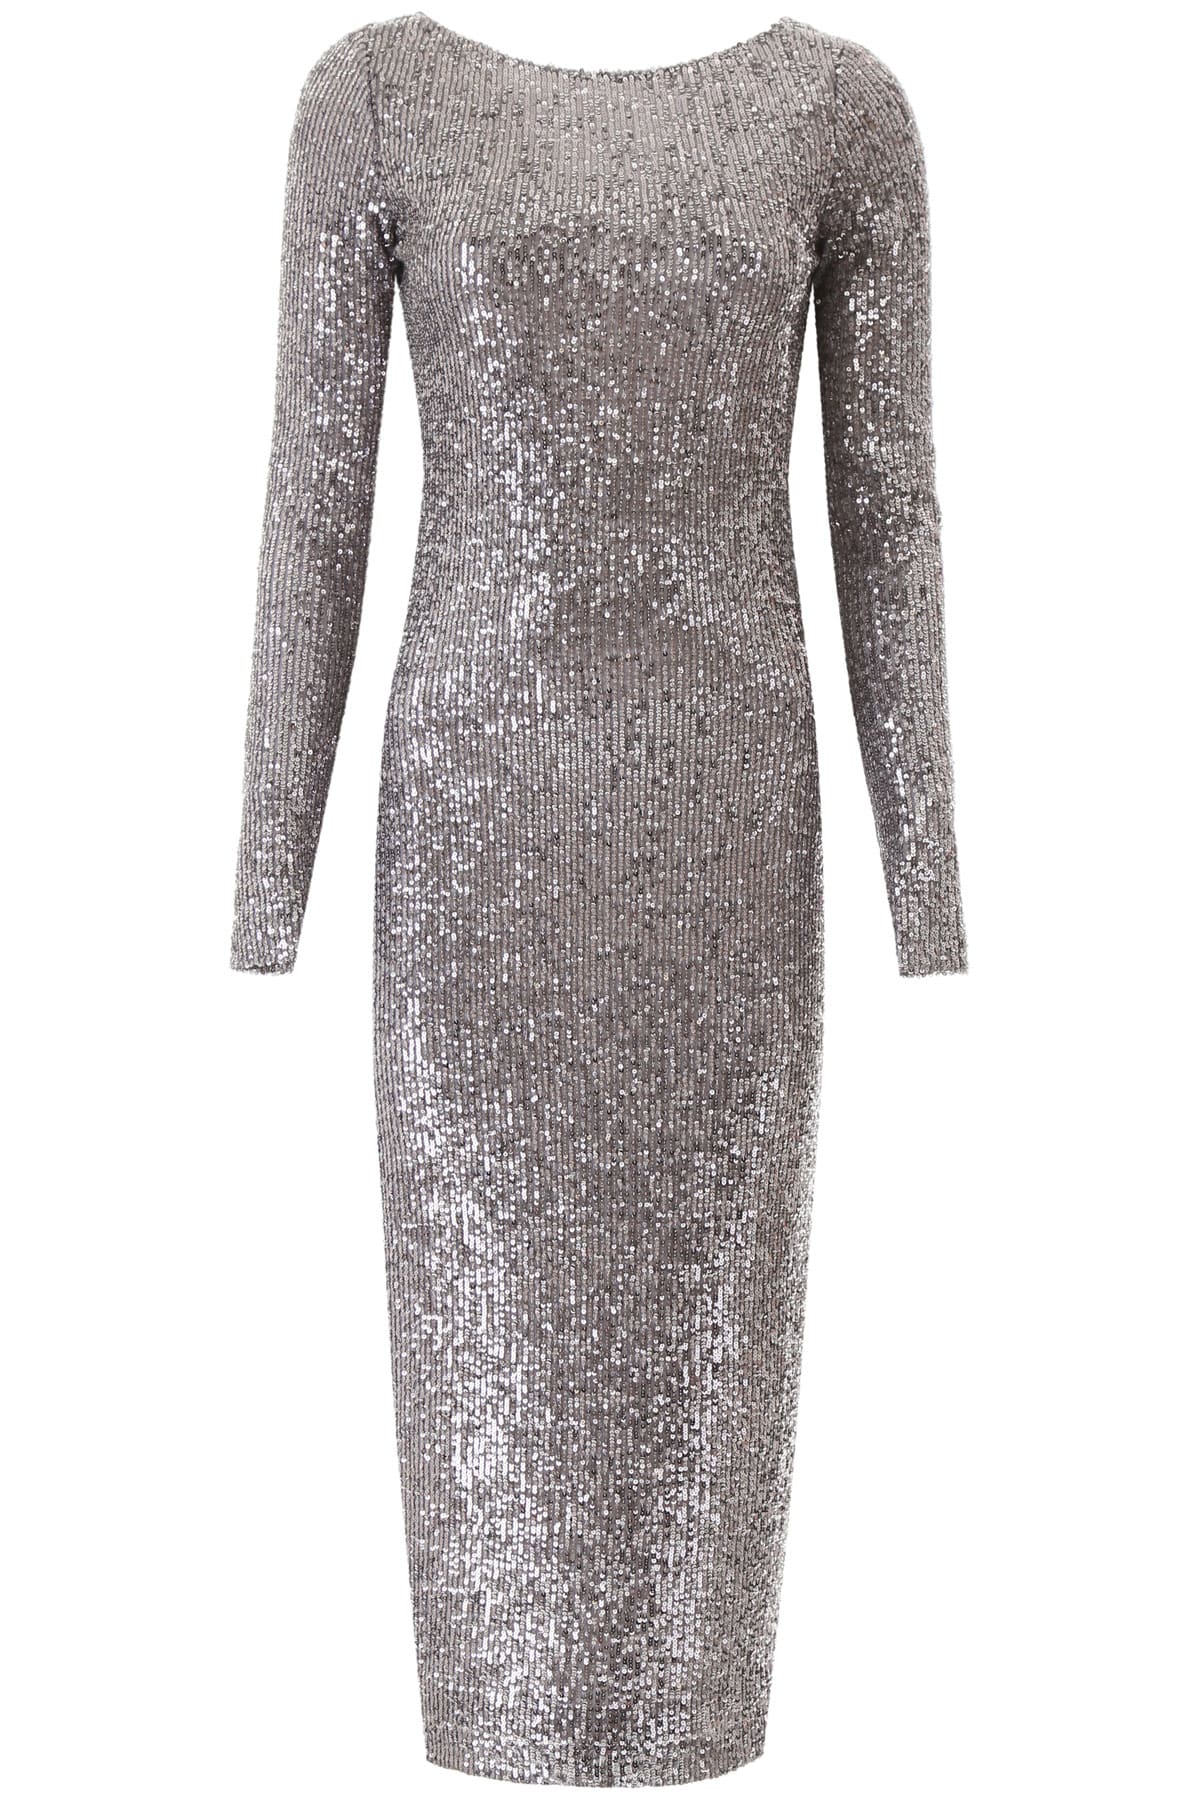 In The Mood For Love Sandy Sequined Midi Dress